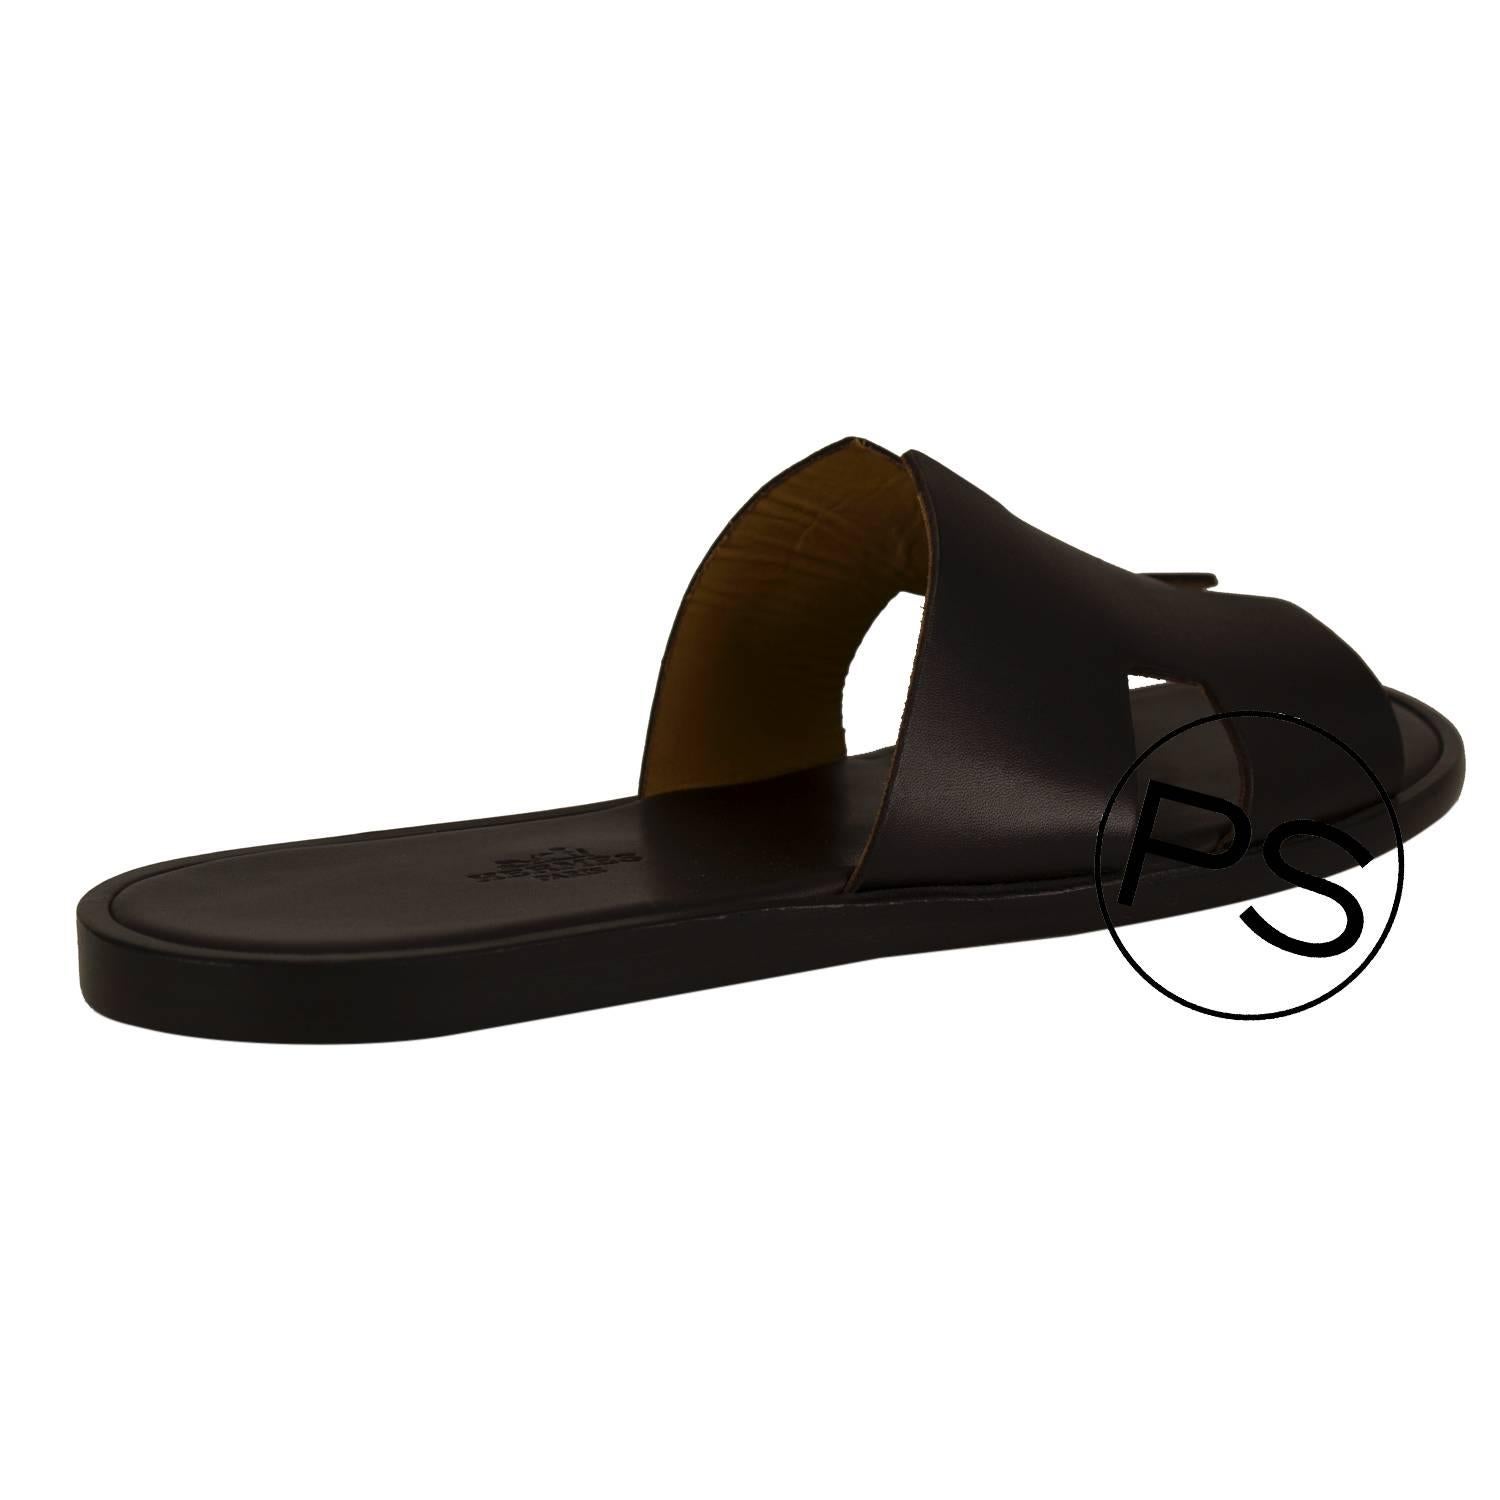 Hermes Sandals Izmir  leather 41 Black 2015.

Pre-owned and never used.

Bought it in Hermes store in 2015.

Model; IZMIR.

Composition; Leather.

Size; 41.

Color;Moka.

 Details:
*Protective felt removed for purposes of photography